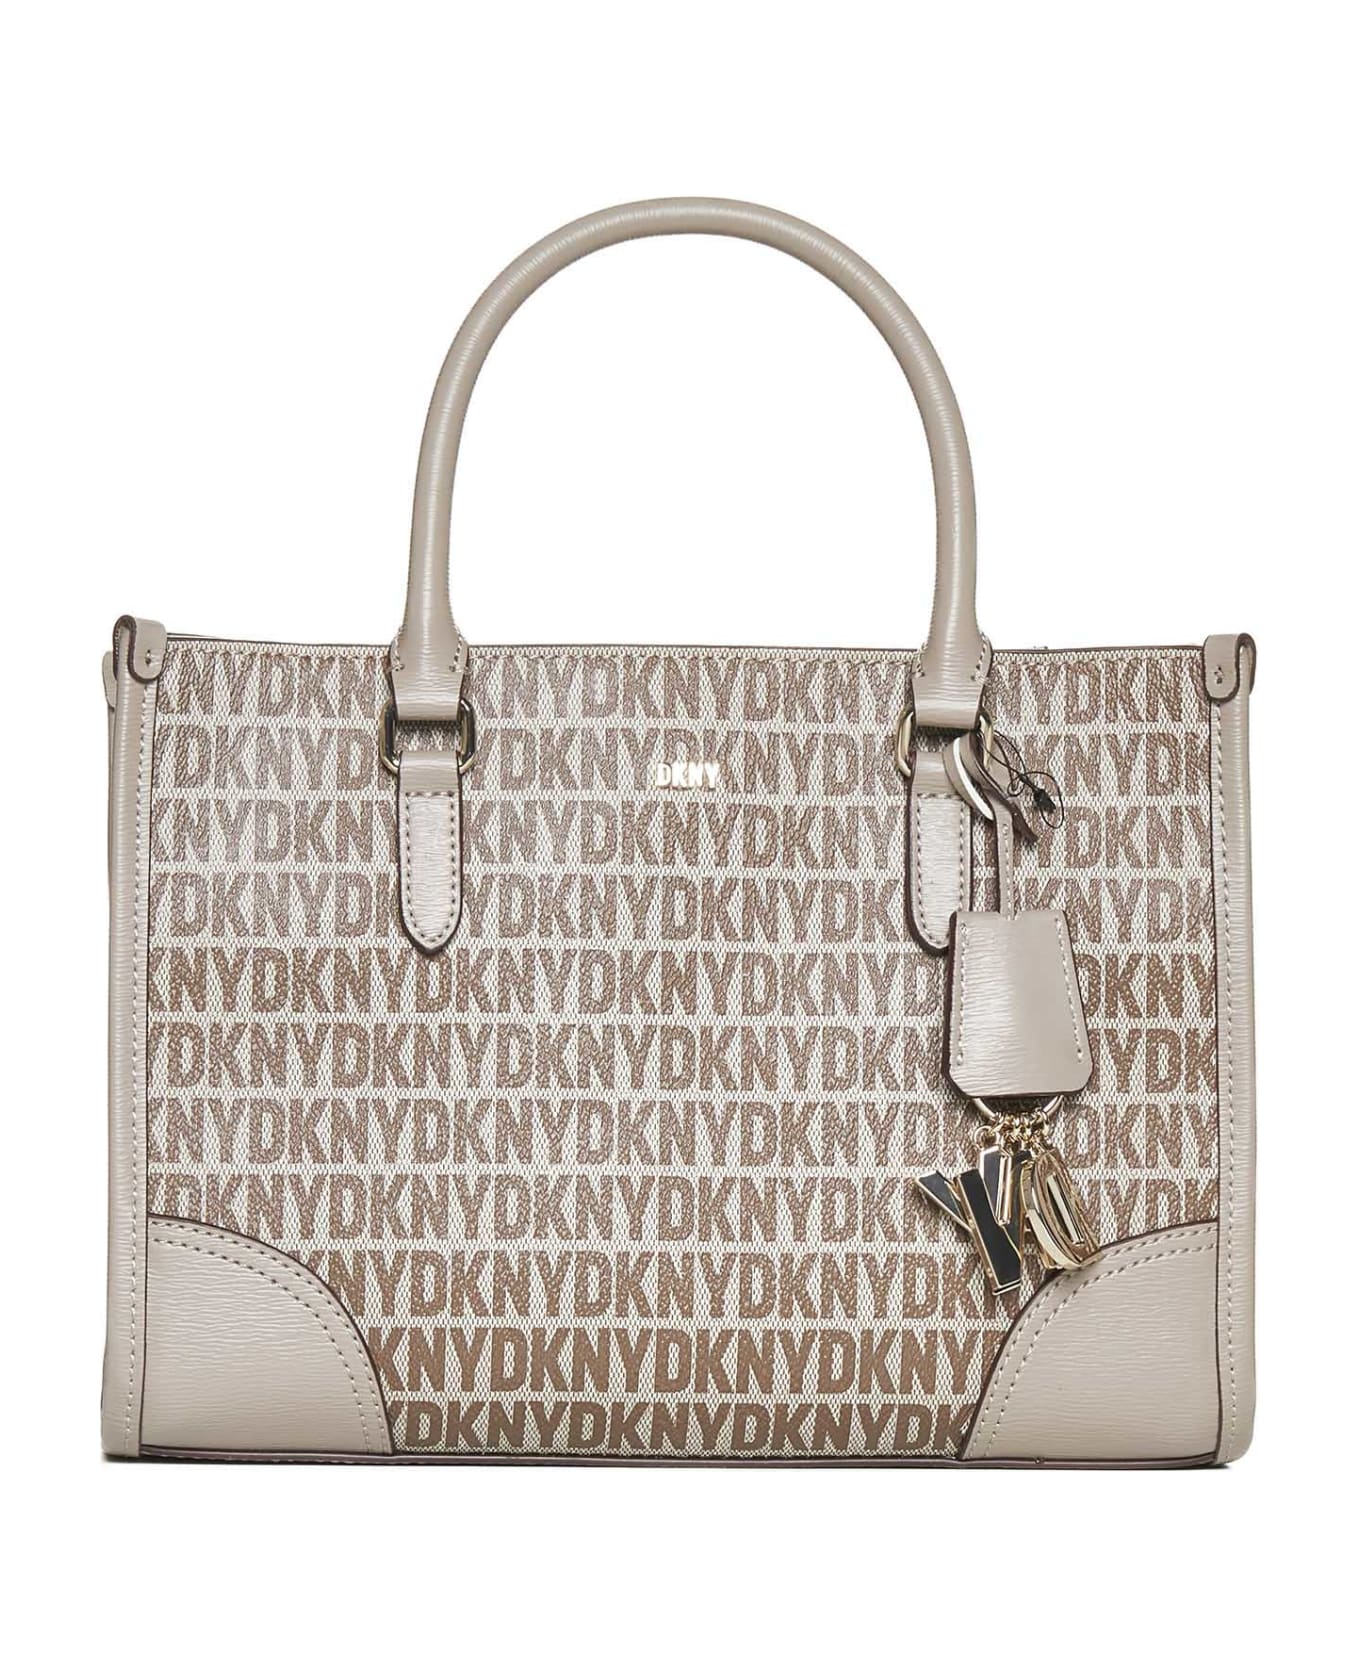 DKNY Tote - Chino/toffee